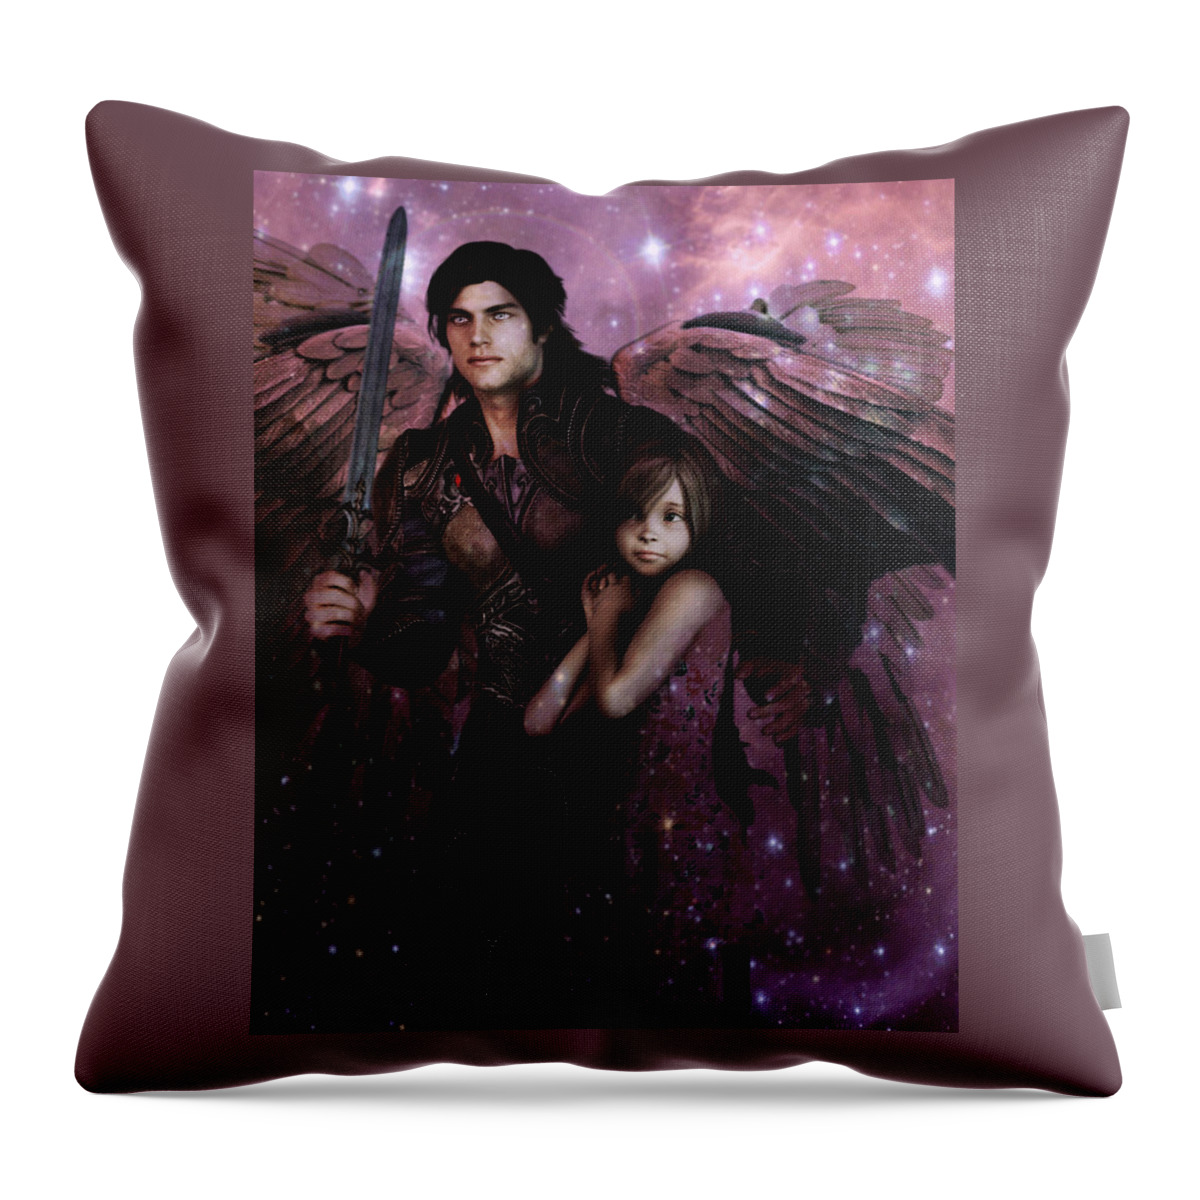 Saint Michael Throw Pillow featuring the painting Saint Michael The Protector by Suzanne Silvir